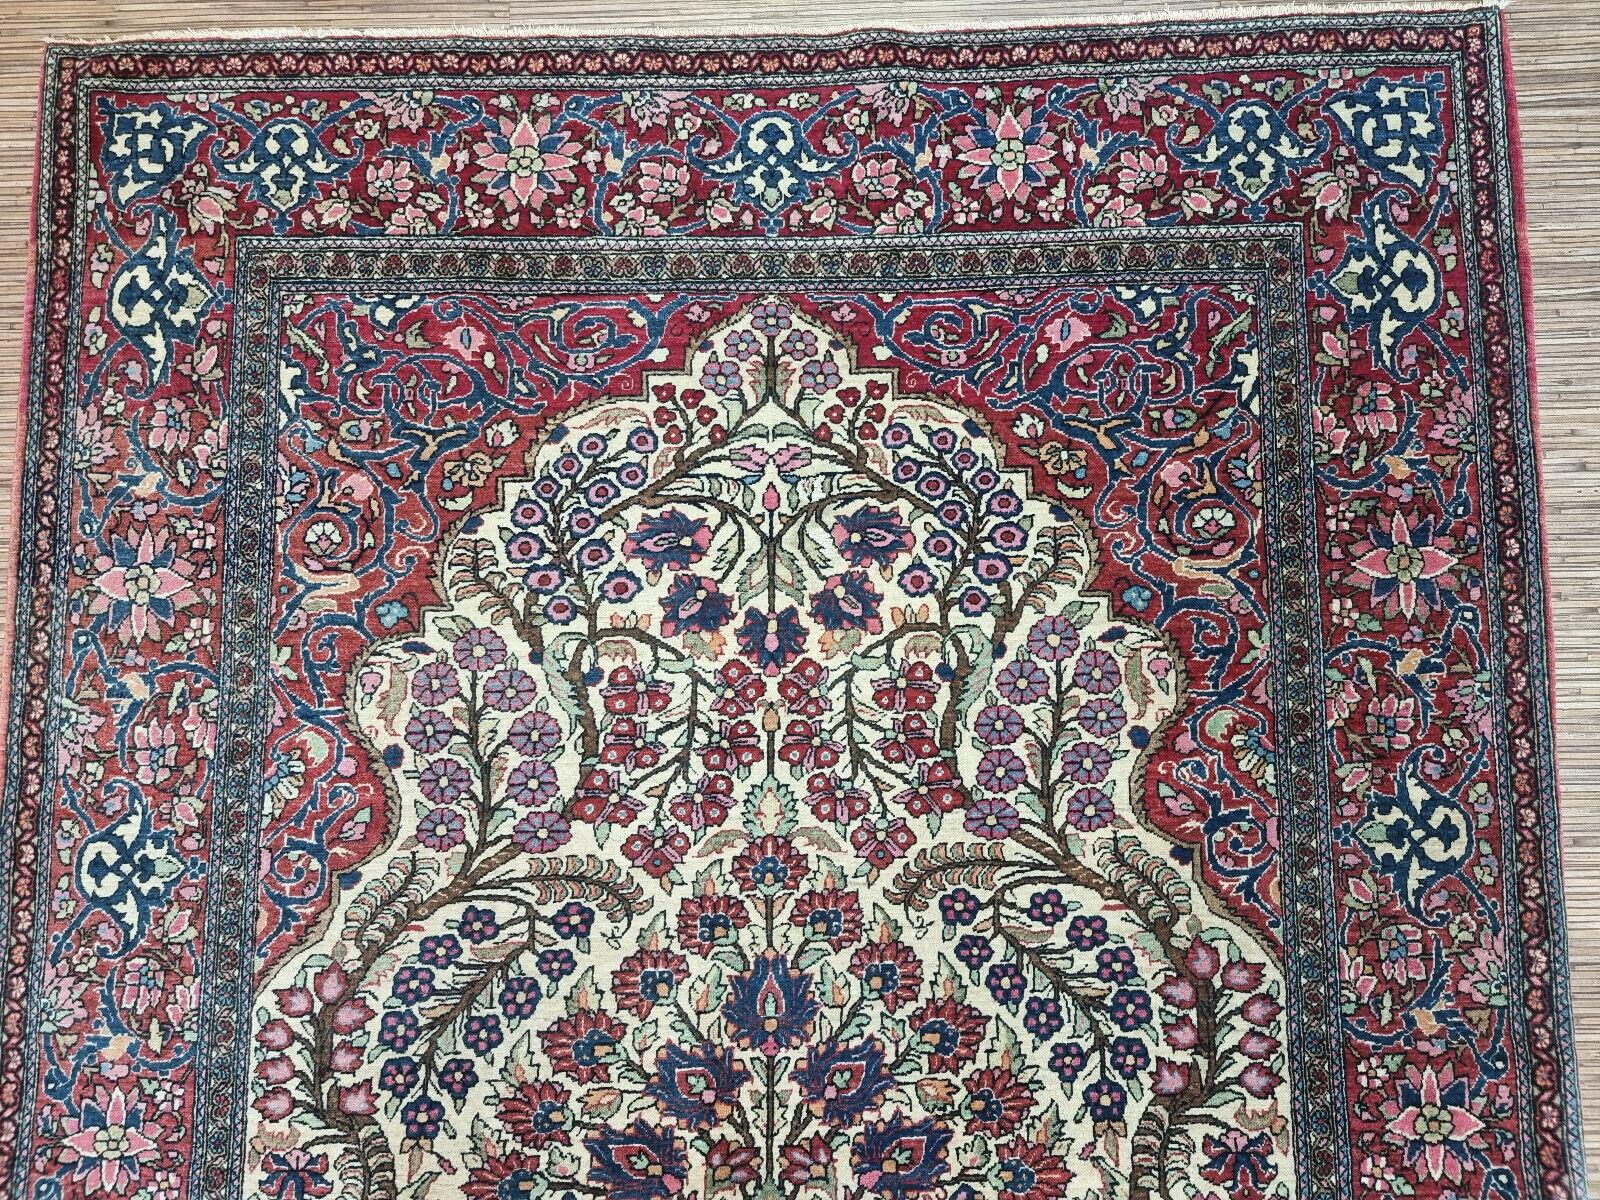 Late 19th Century Handmade Antique Persian Style Isfahan Prayer Rug 4.6' x 6.8', 1900s - 1D85 For Sale